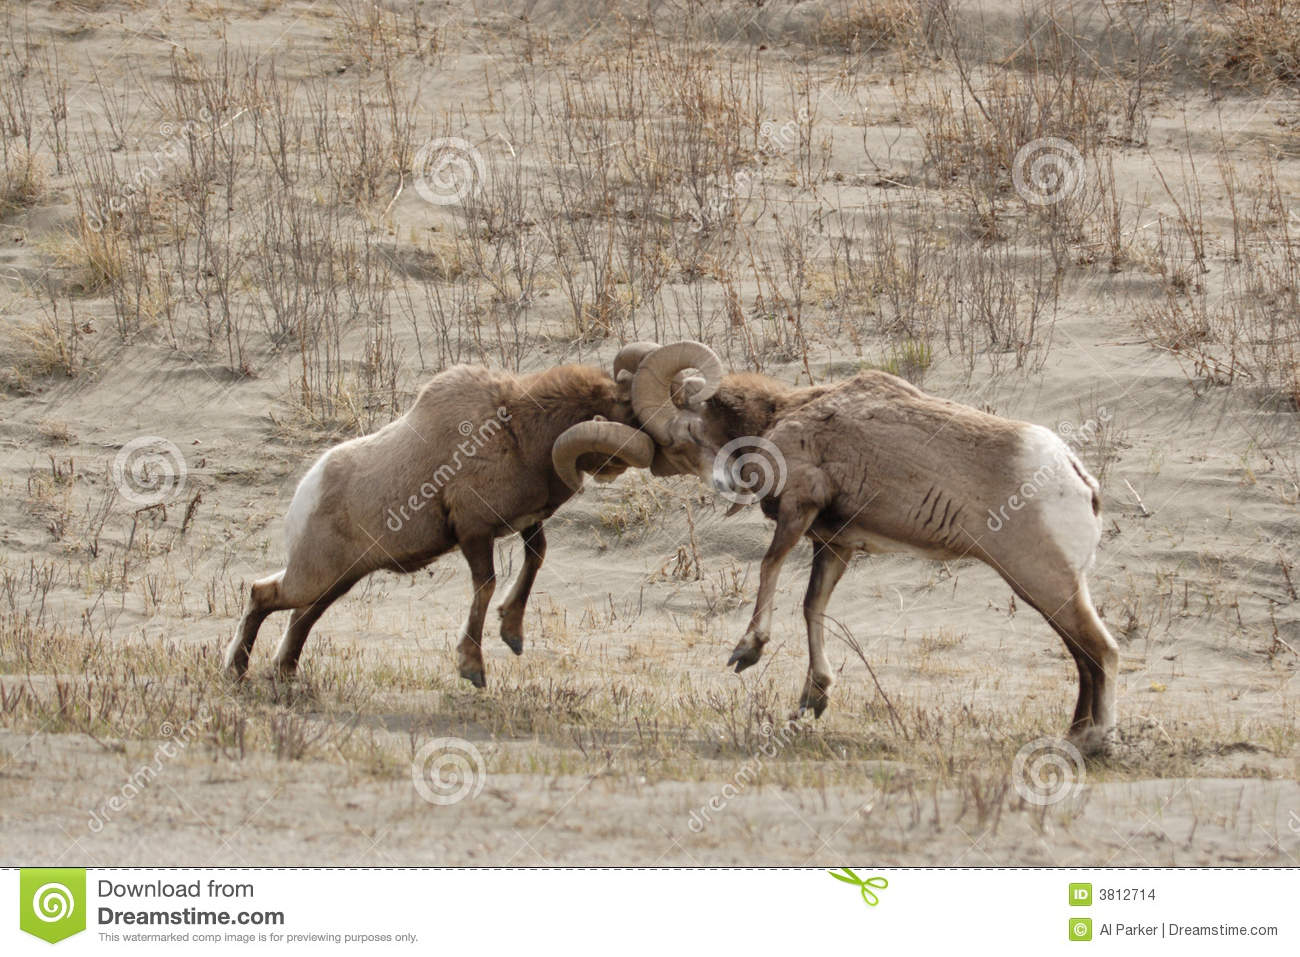 Big Horn Sheep Fighting  Stock Images   Image  3812714